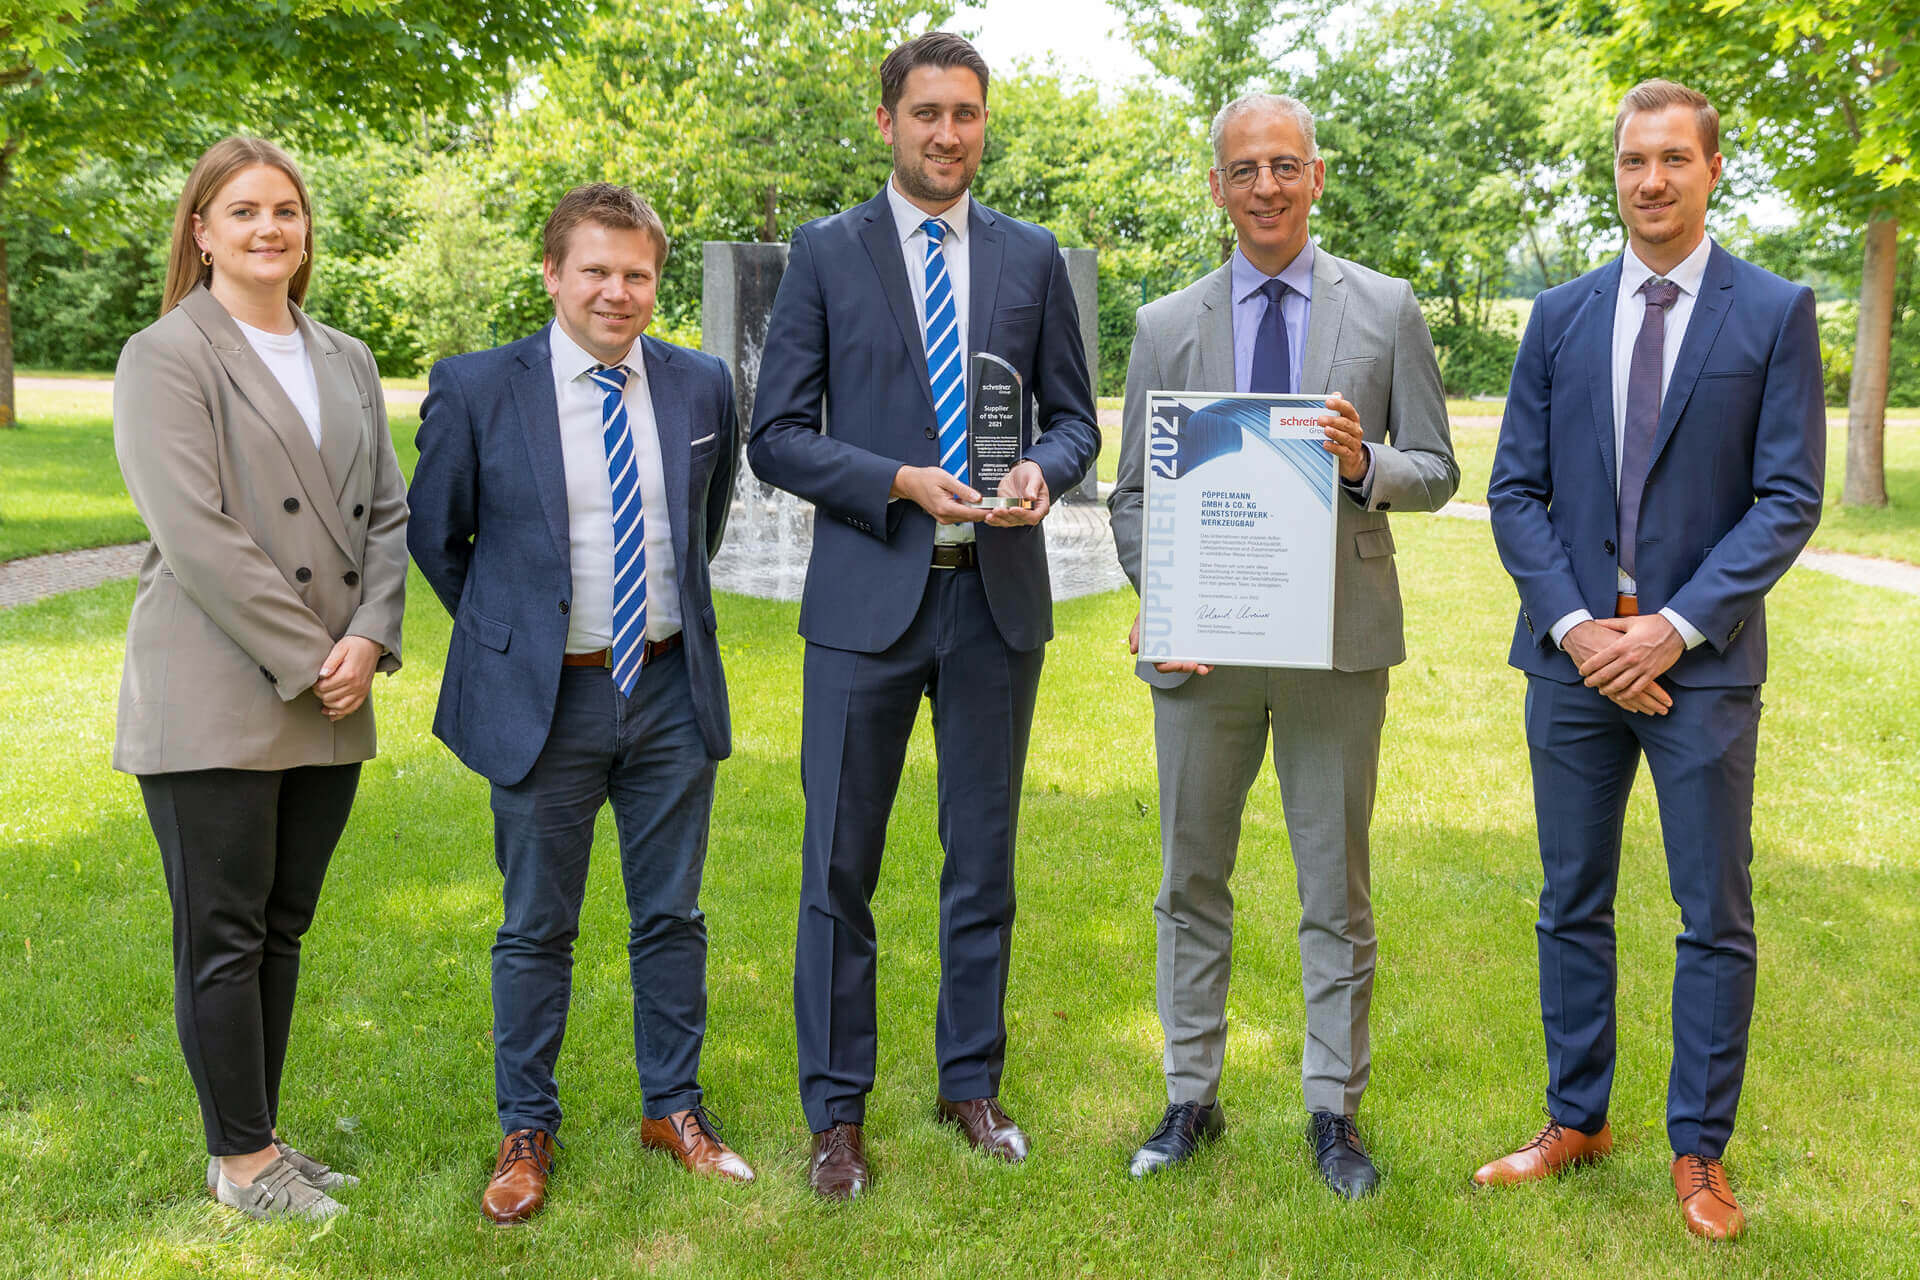 Schreiner Group has recognized its supplier Pöppelmann with an award for the second time. Three delegates from Pöppelmann accepted the accolade with great pleasure: customer order manager Stefanie Wördemann, head of sales Michael Dultmeyer, and project leader Thorsten Schneithorst with CEO Roland Schreiner and Sebastian Hofmaier from Schreiner Group’s purchasing department (from left to right).